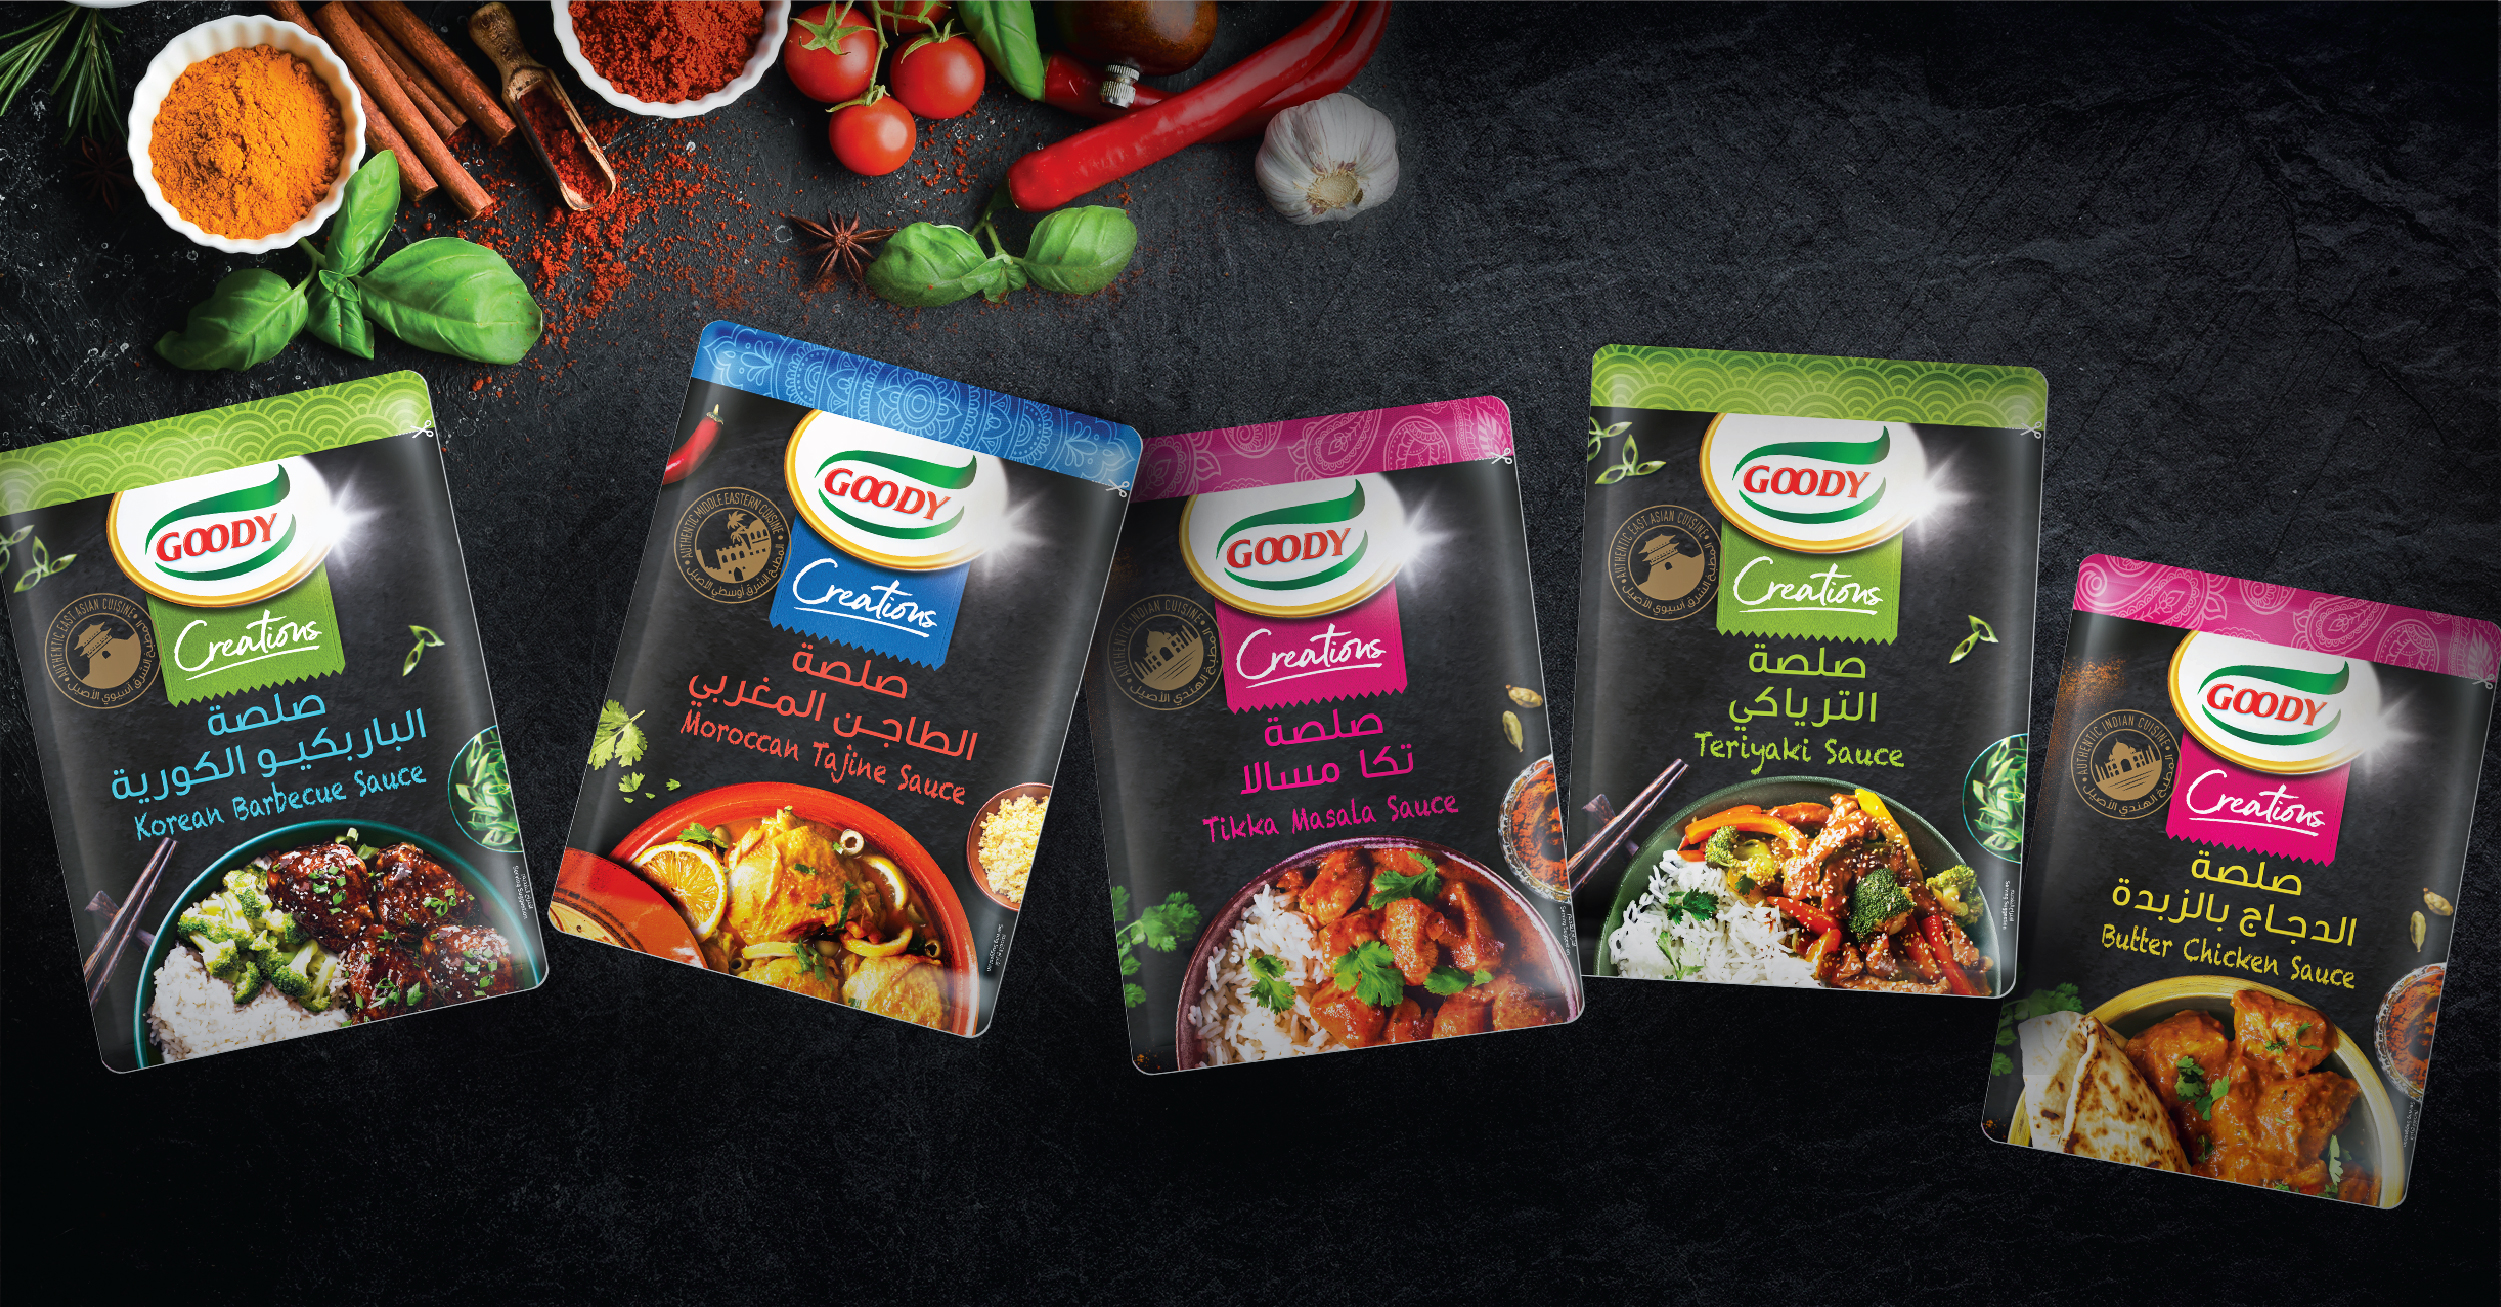 Goody Launches a Range of Ready-to-use Simmer Sauces!